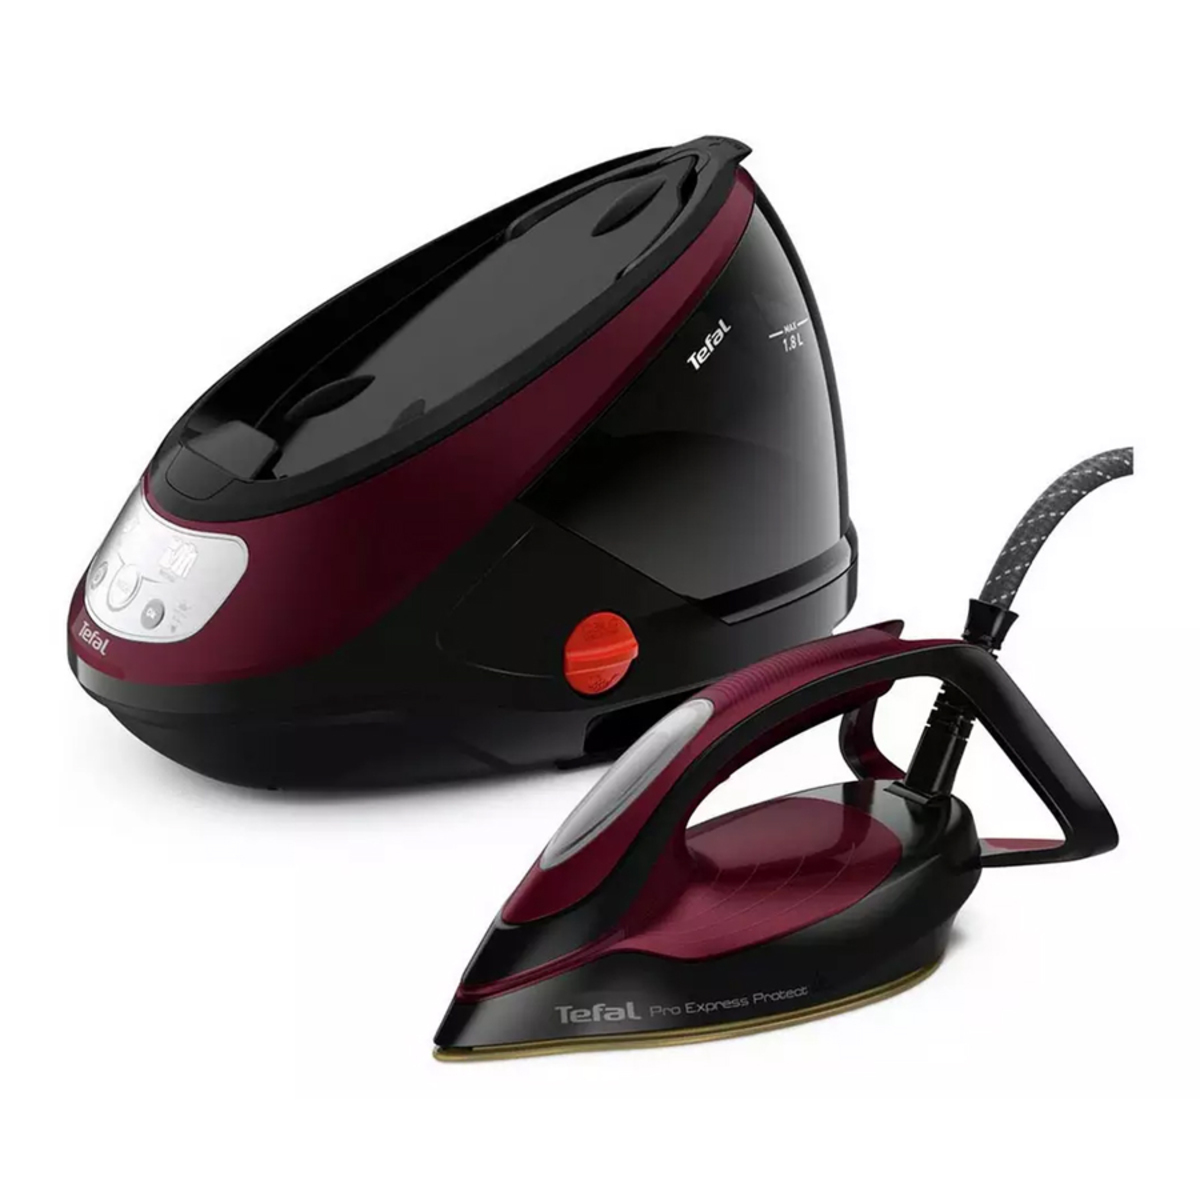 Image of TEFAL GV9230G0 Pro Express Protect Steam Generator Iron